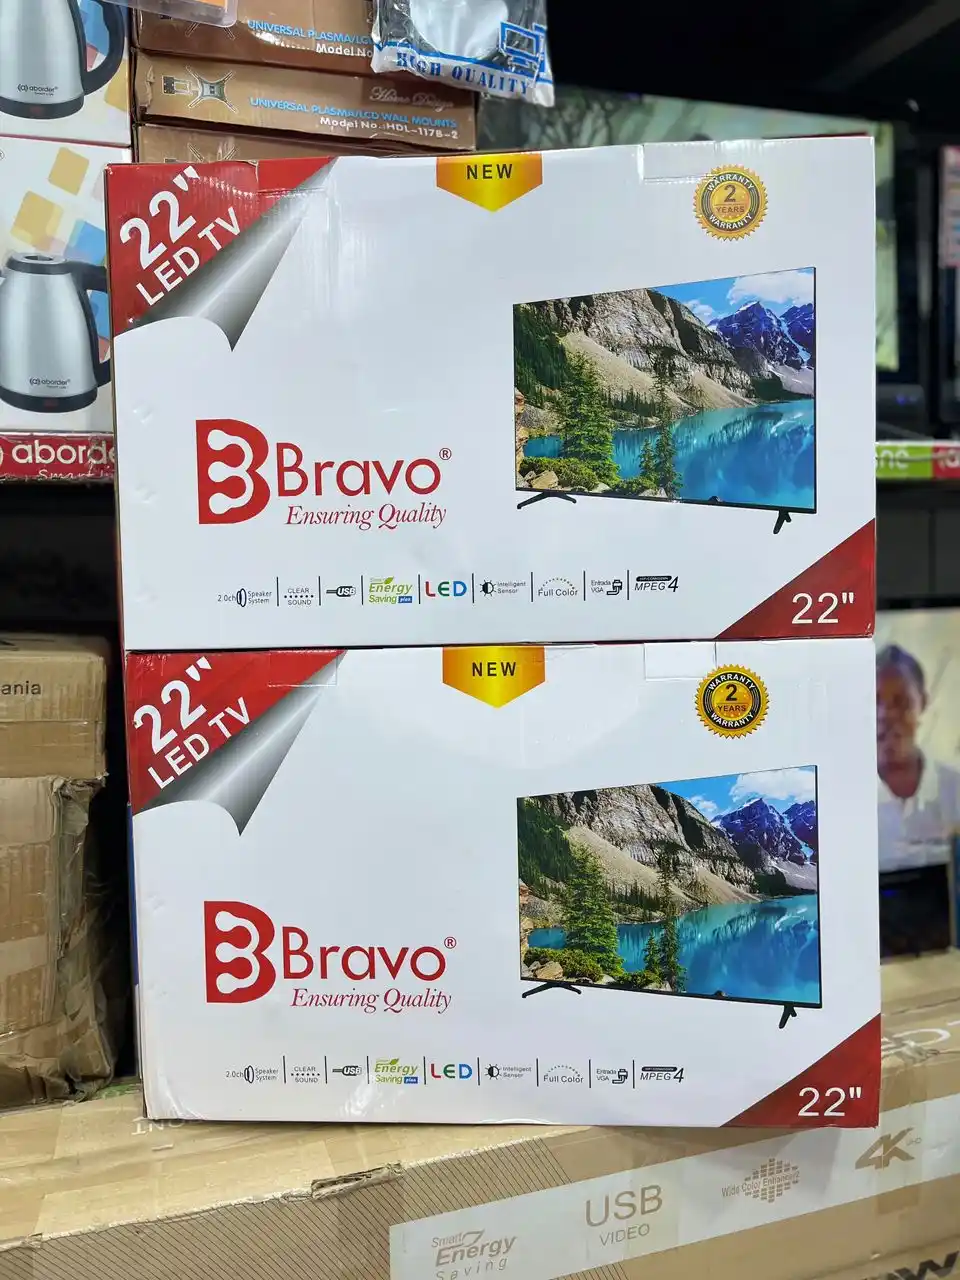 Bravo Tv Inch 22 Double Glasss Ina Usb ,Voice Speaker, And Good Quality.